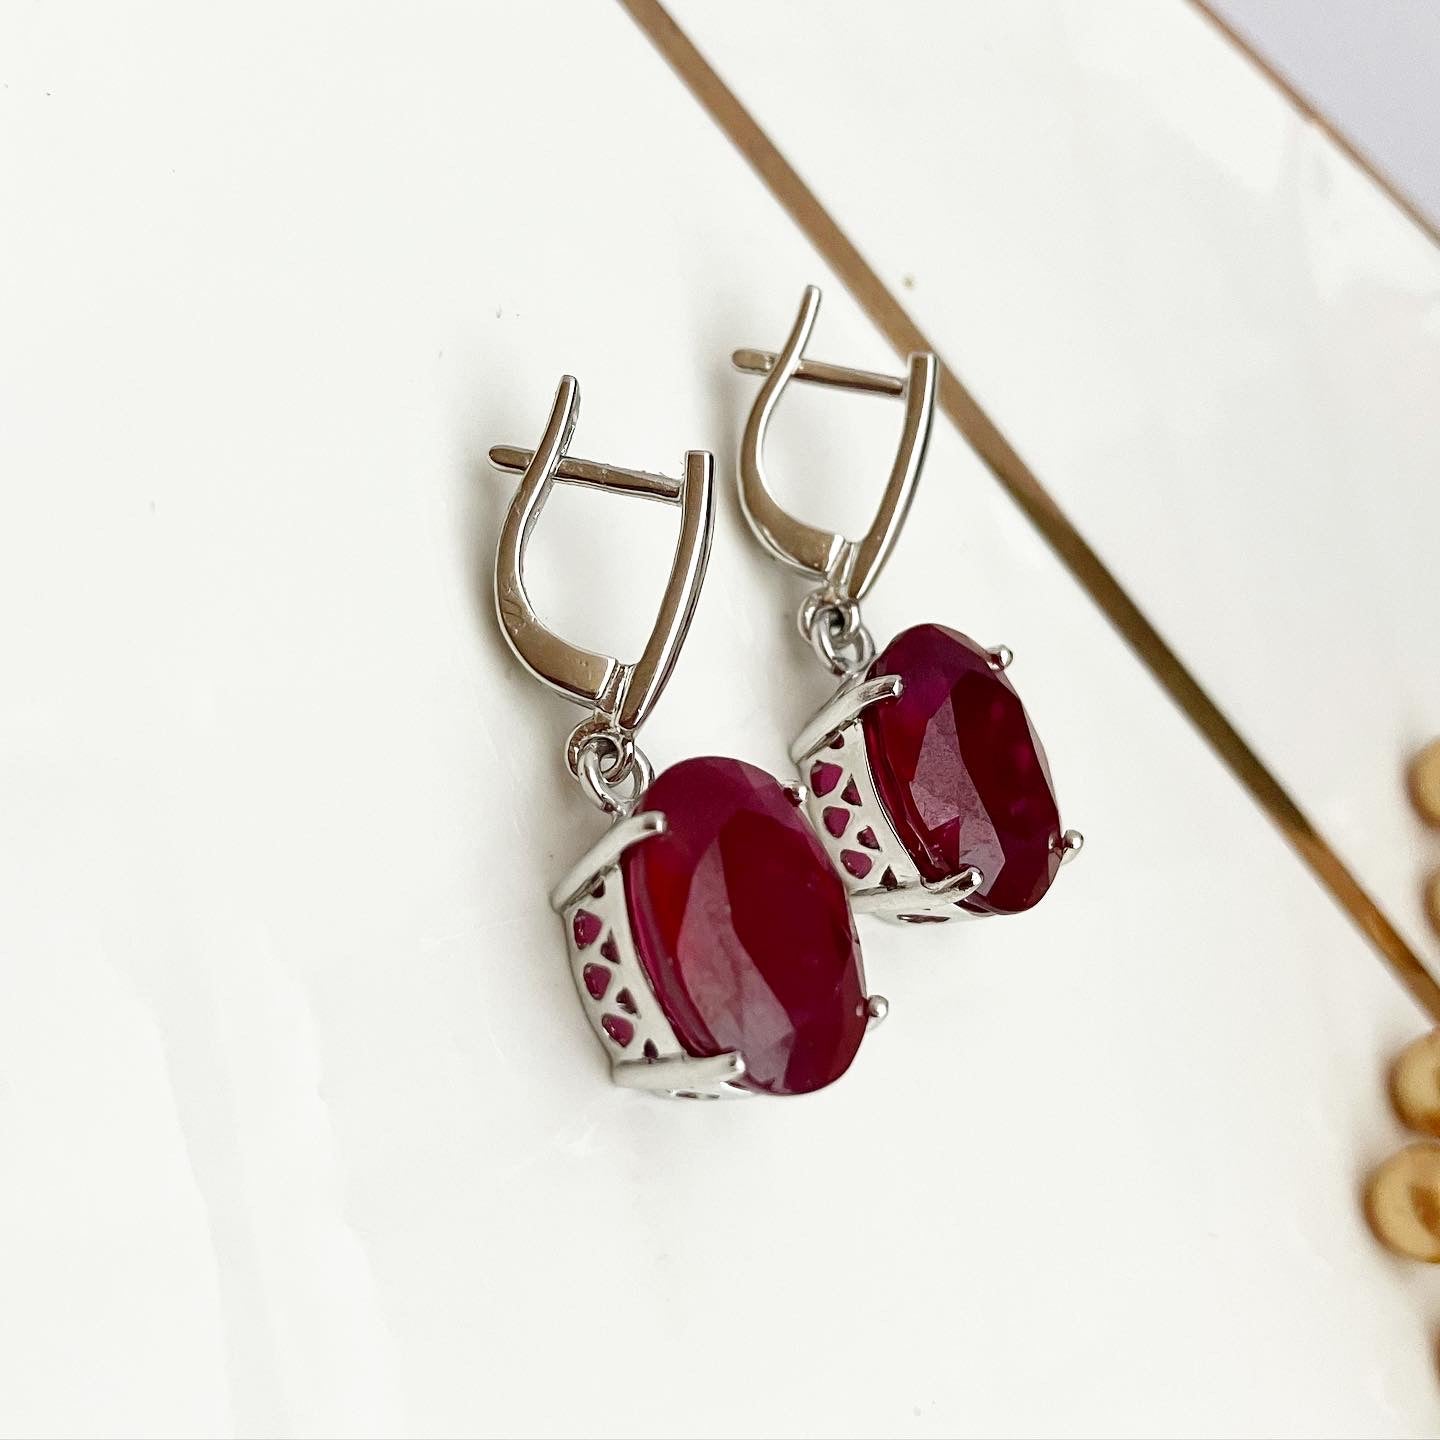 Earrings 925 sterling silver with ruby.